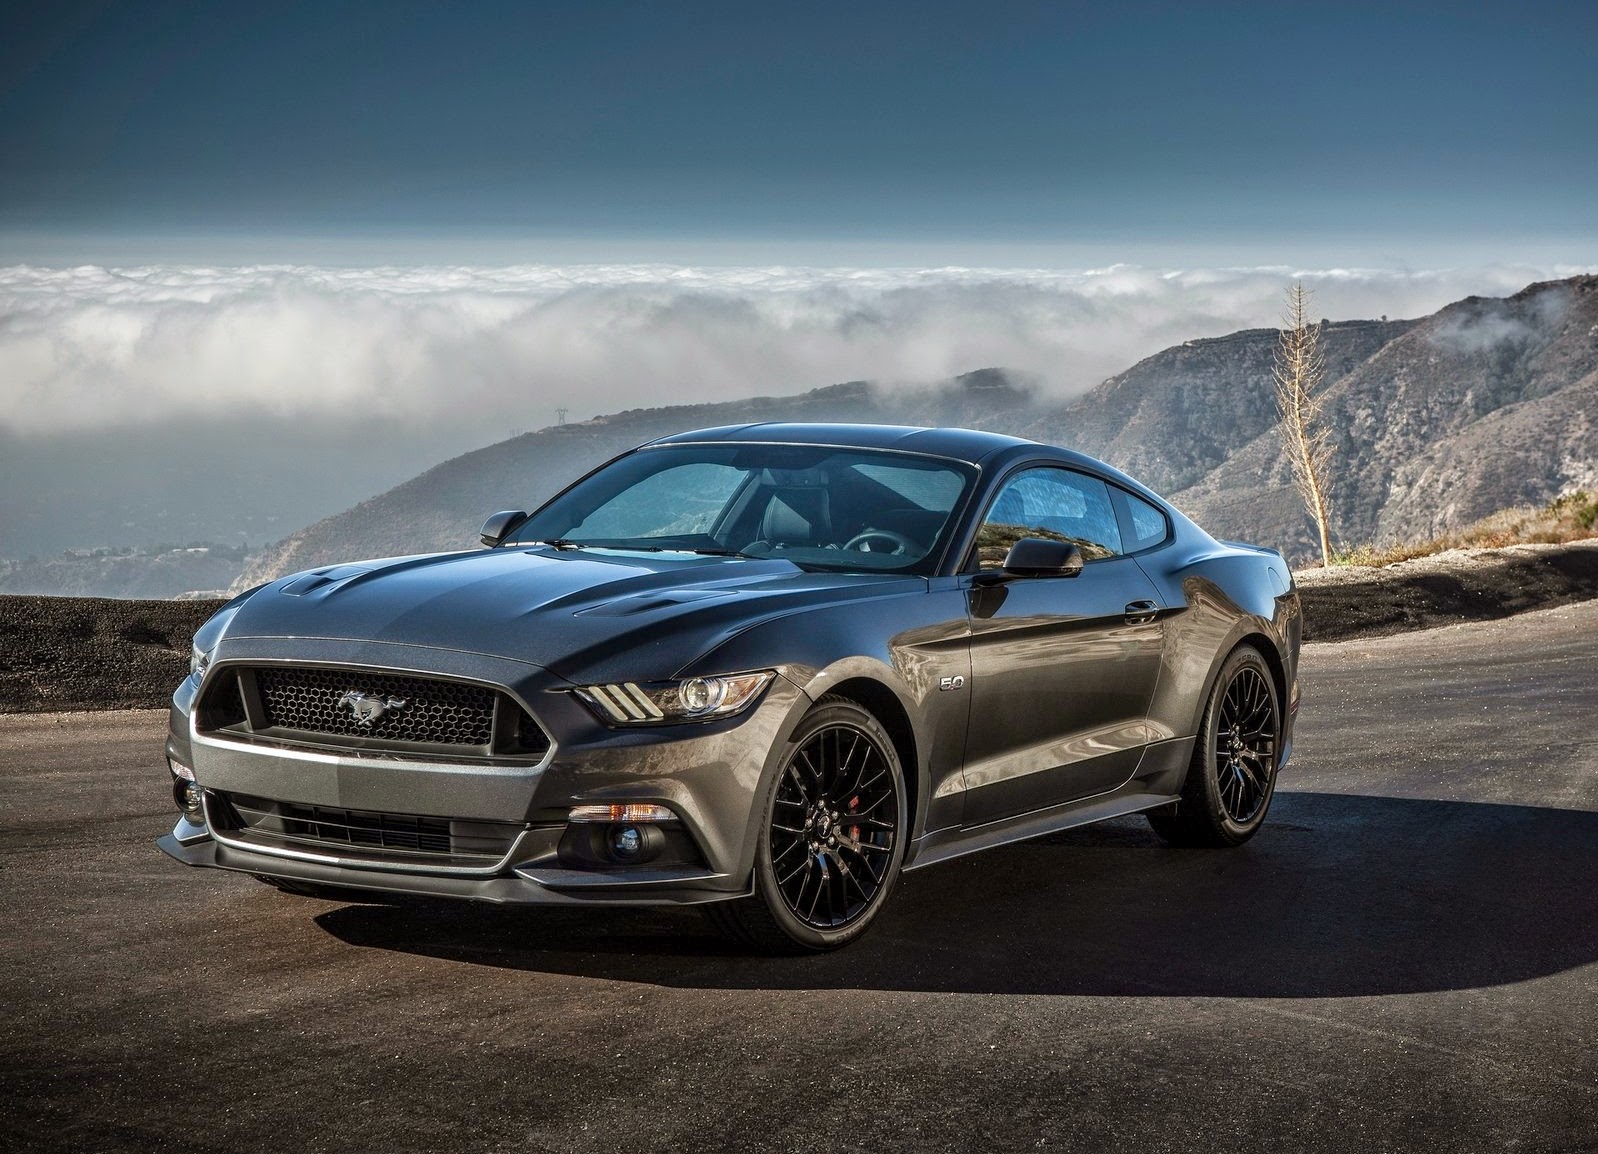 Ford Mustang Gt Awesome HD Car Wallpaper